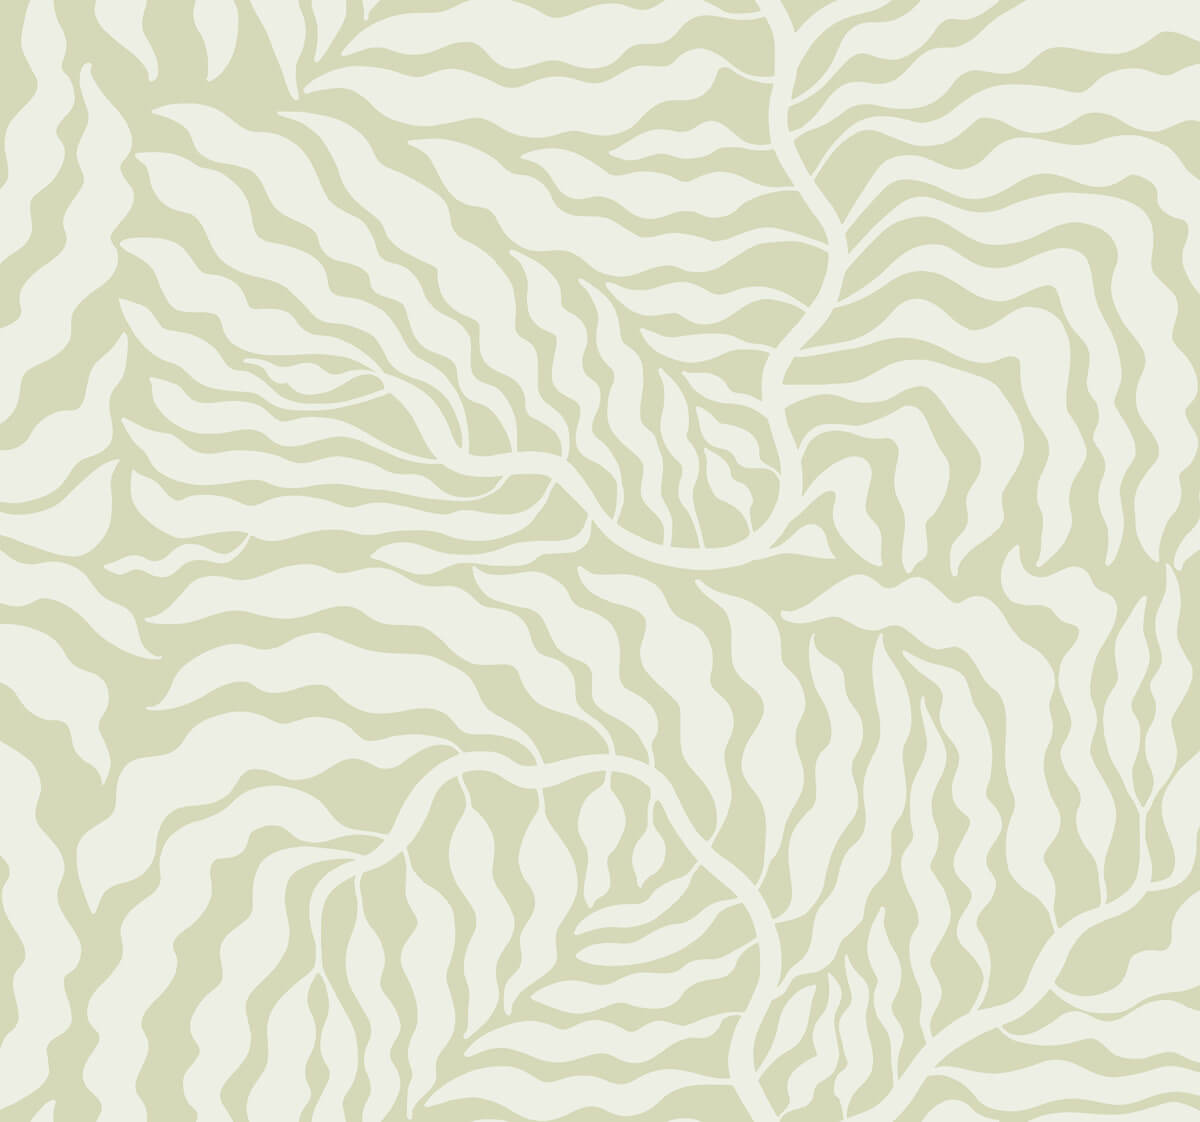 Artistic Abstracts Fern Fronds Wallpaper - Green